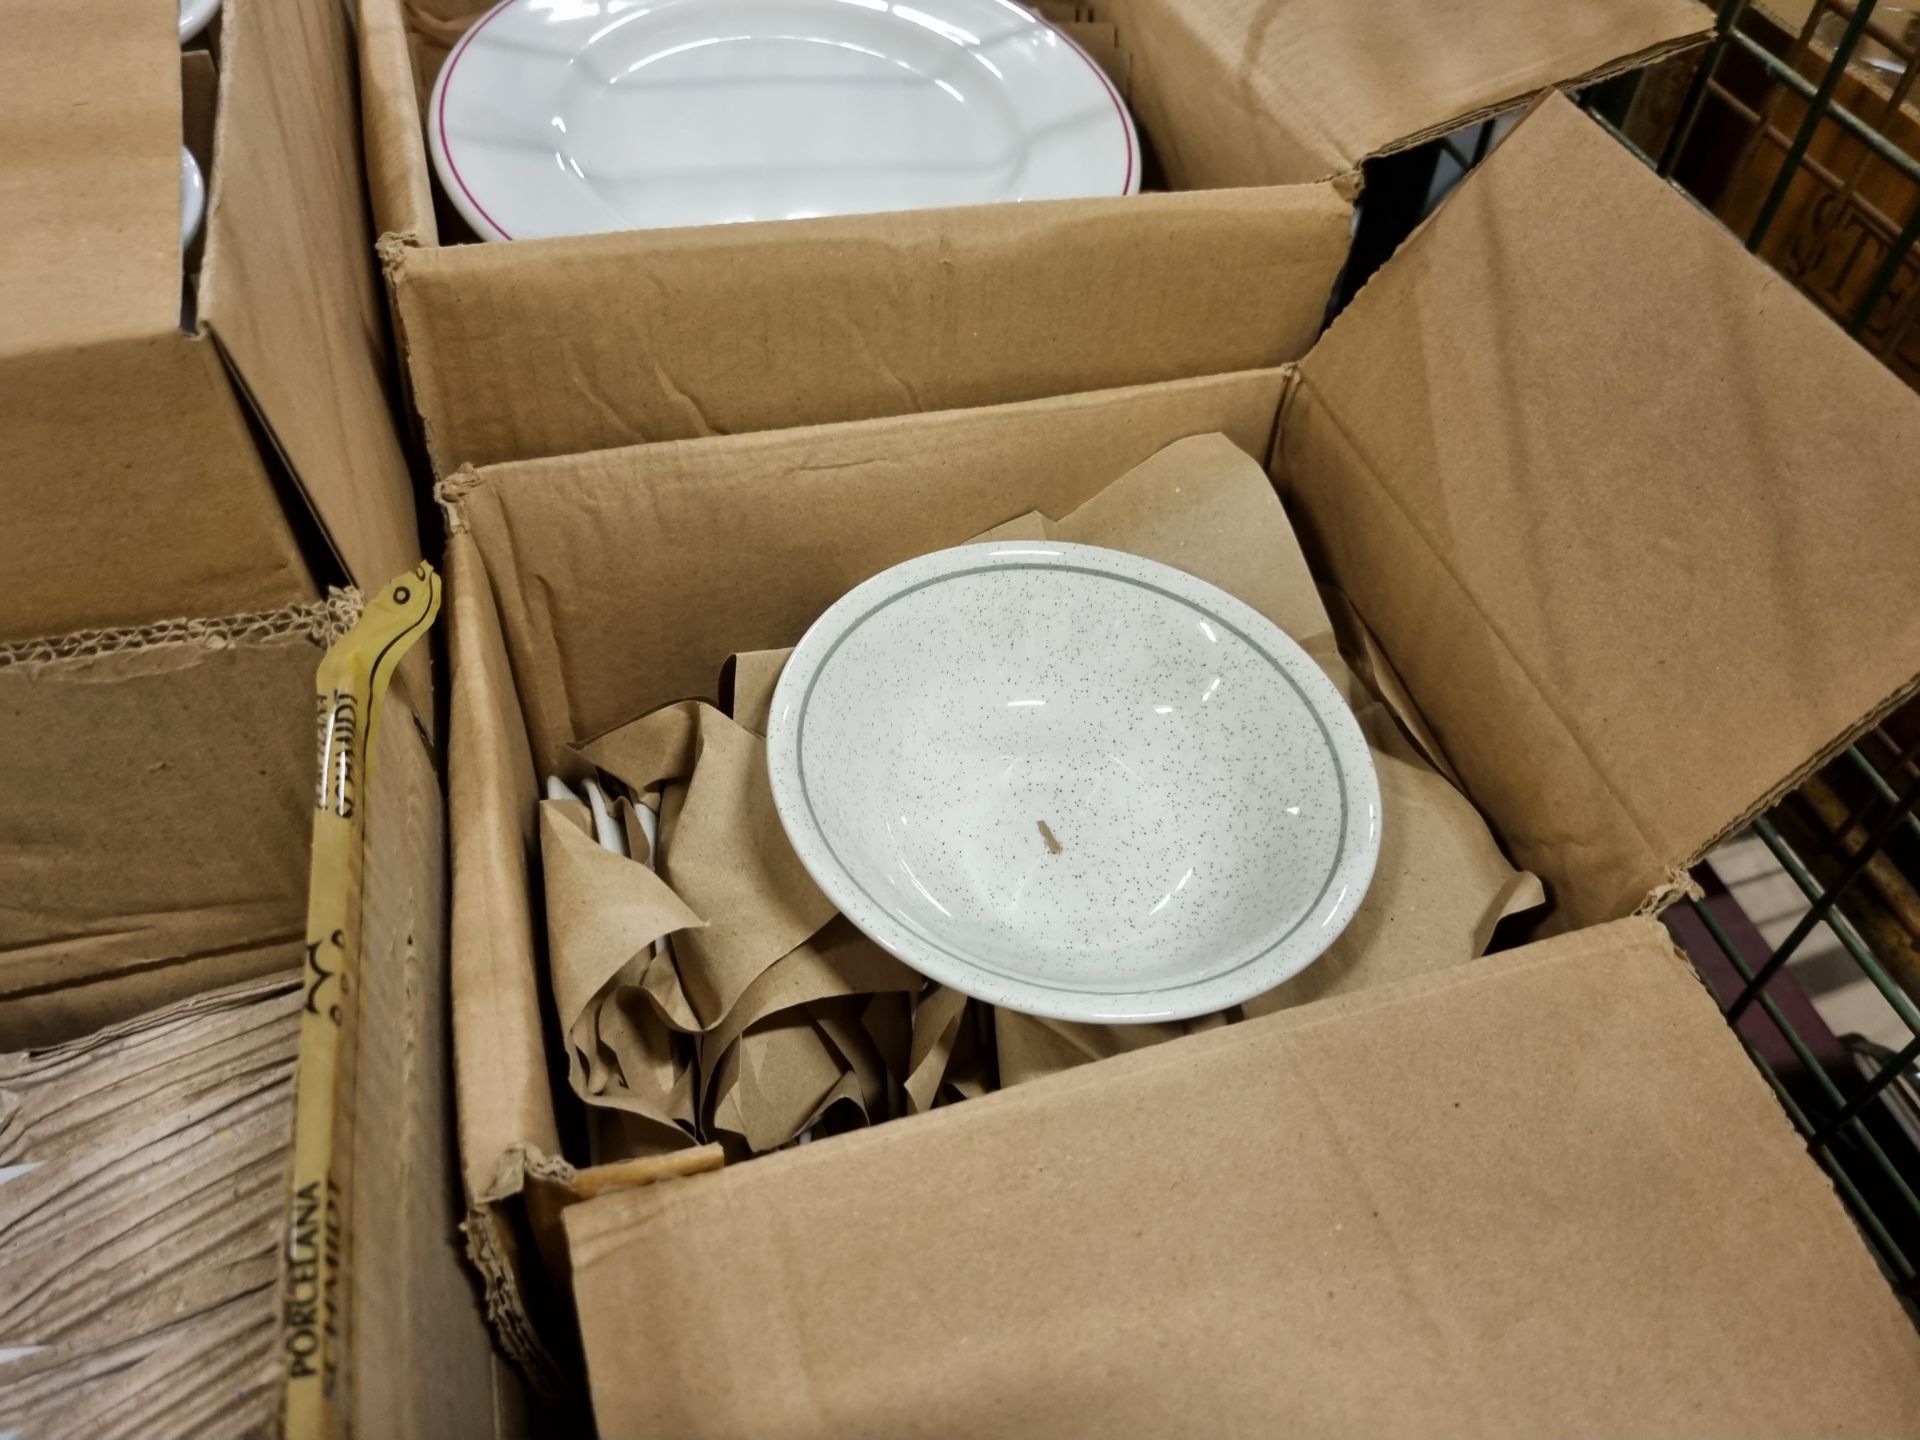 Catering Equipment - White large plates, side plate, saucers, bowls, dishes - Image 5 of 8